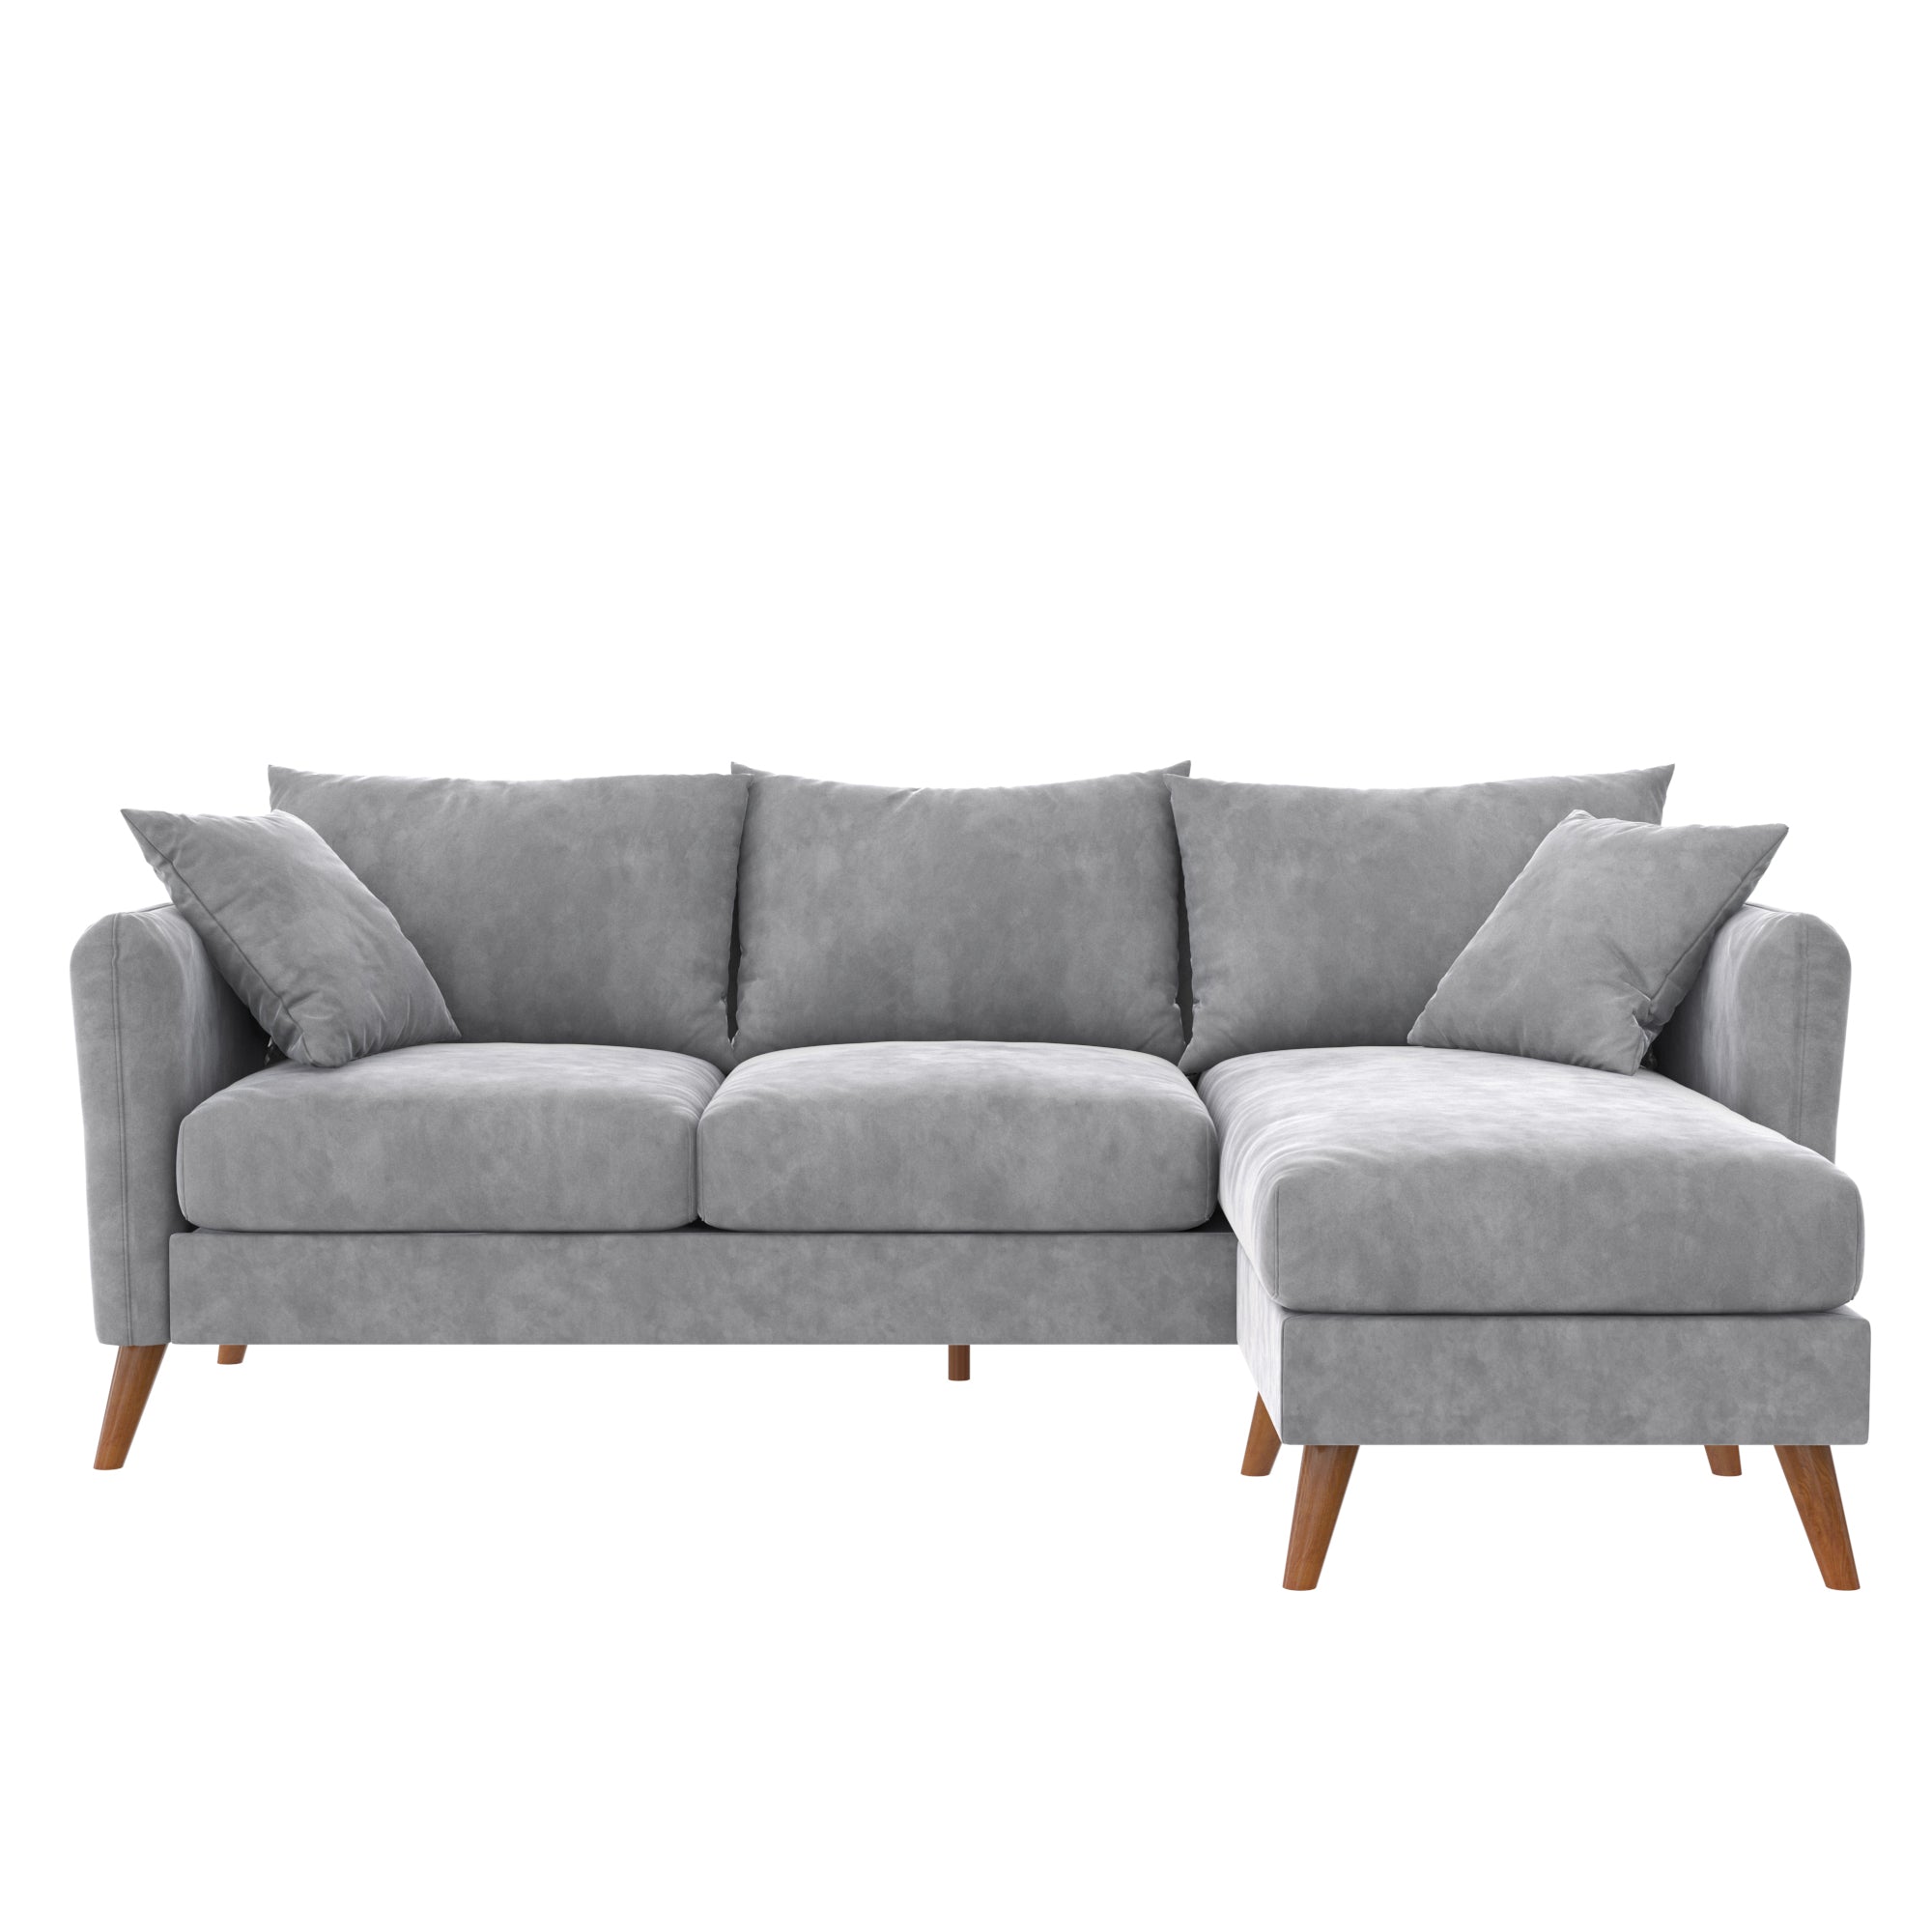 Image of Magnolia Sectional